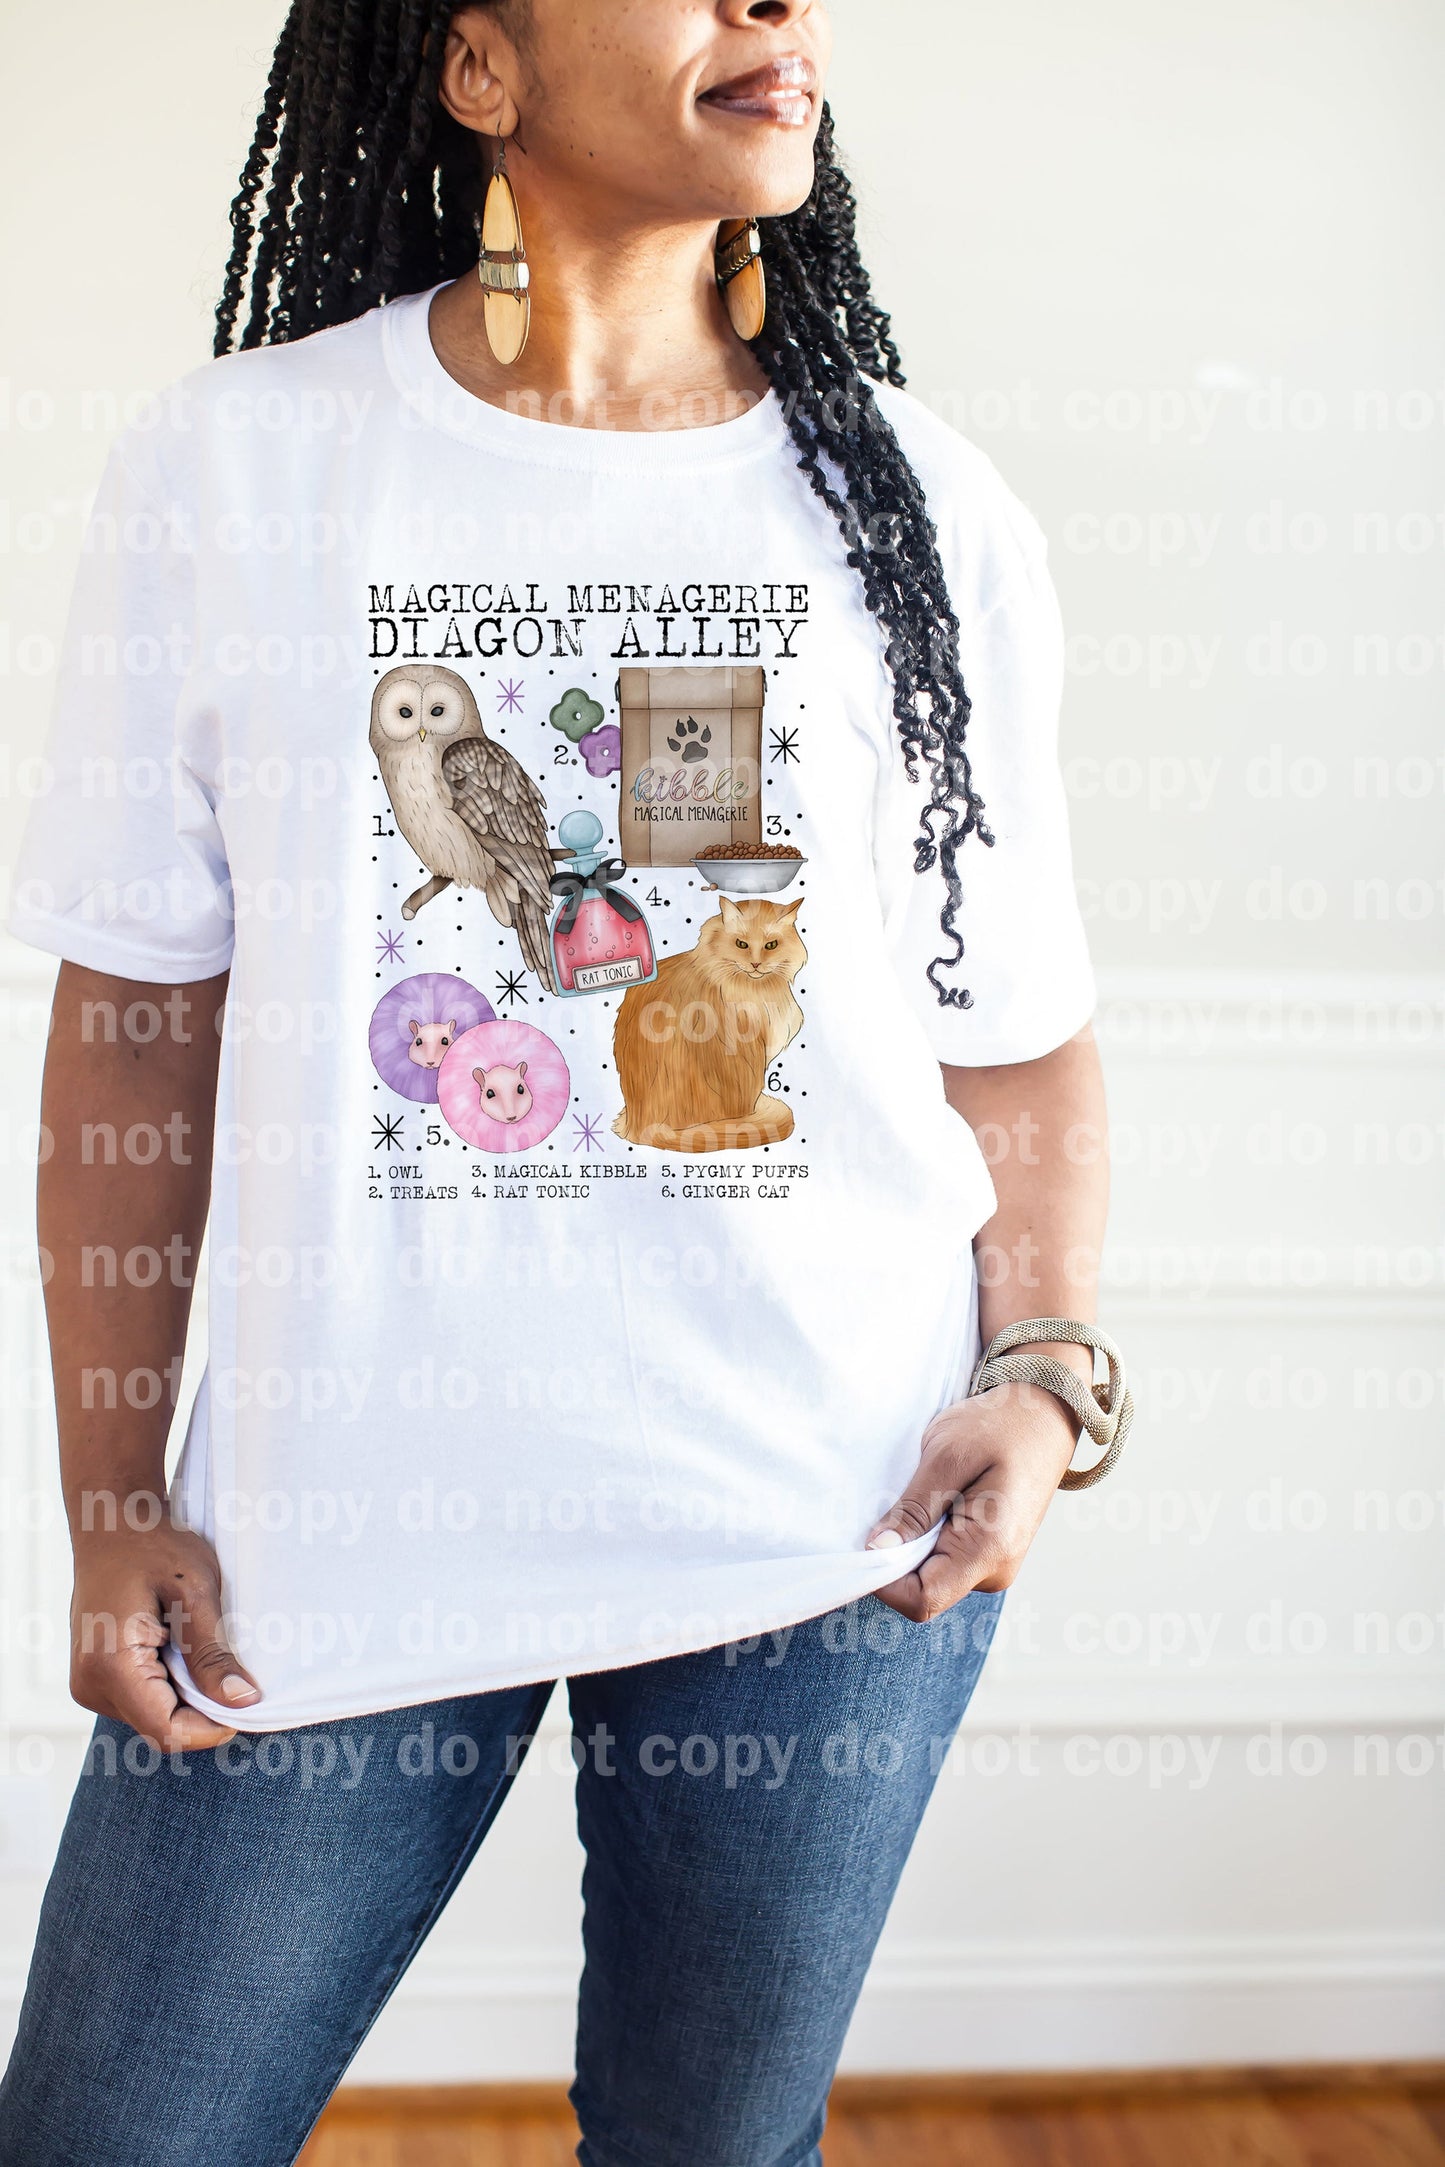 Magical Menagerie Diagon Alley Dream Print or Sublimation Print